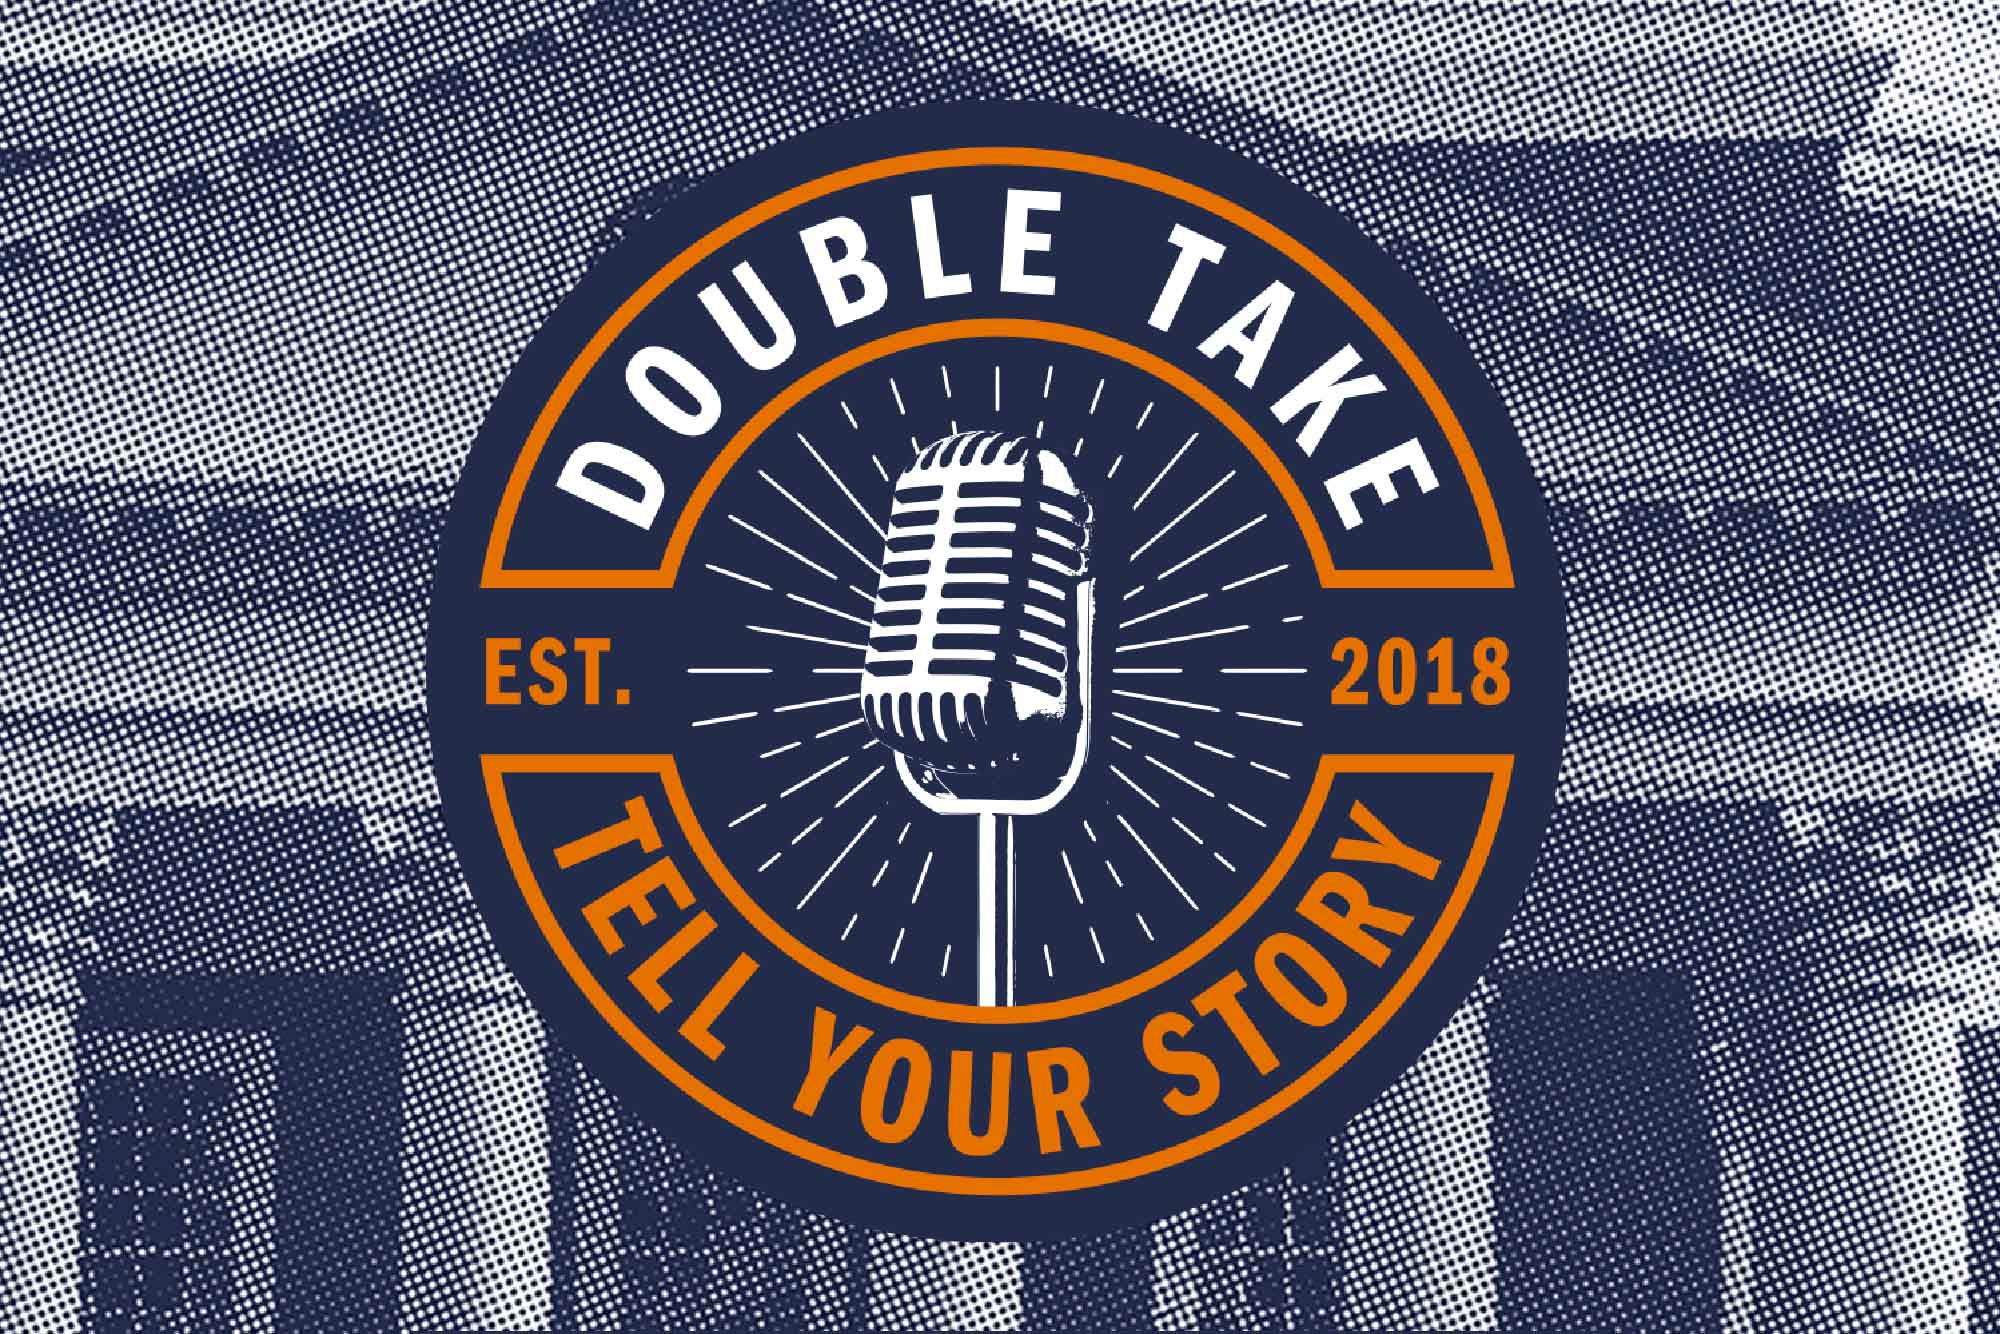 double take: Tell your story established 2018